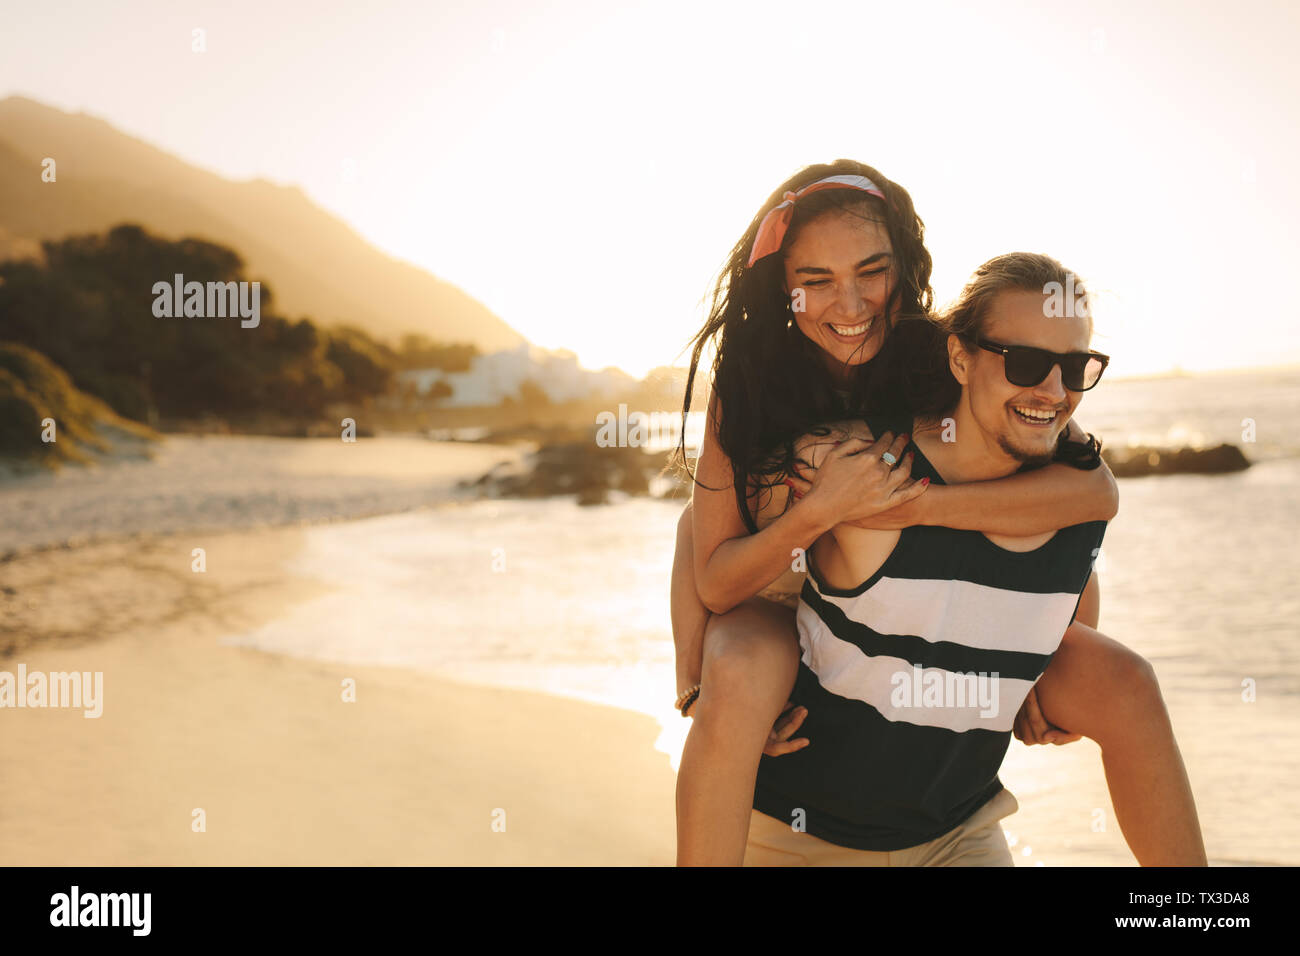 Young man and woman on vacation on a beautiful summer's day. Happy man carrying a woman on his back walking on beach. Stock Photo